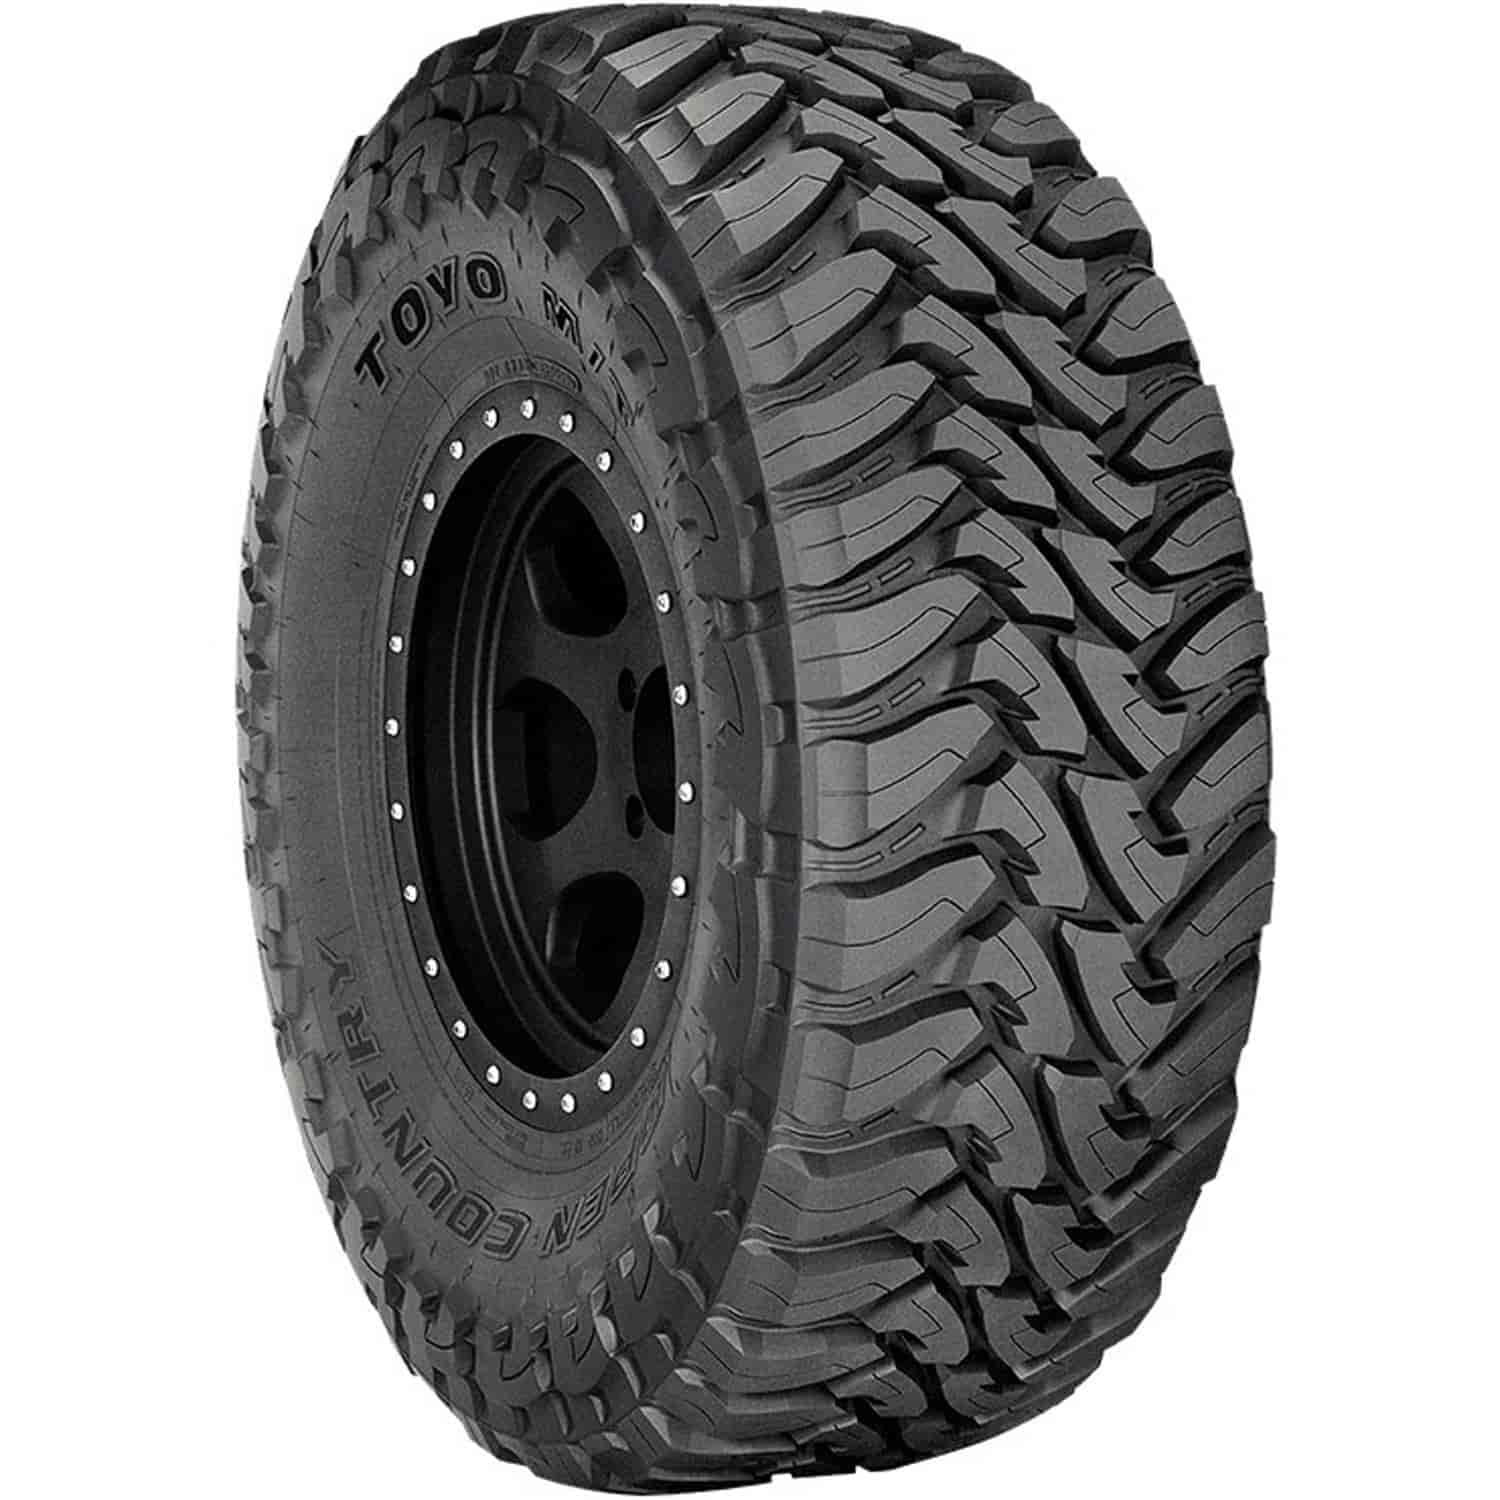 Open Country M/T LT235/85R16 120/116P E/10